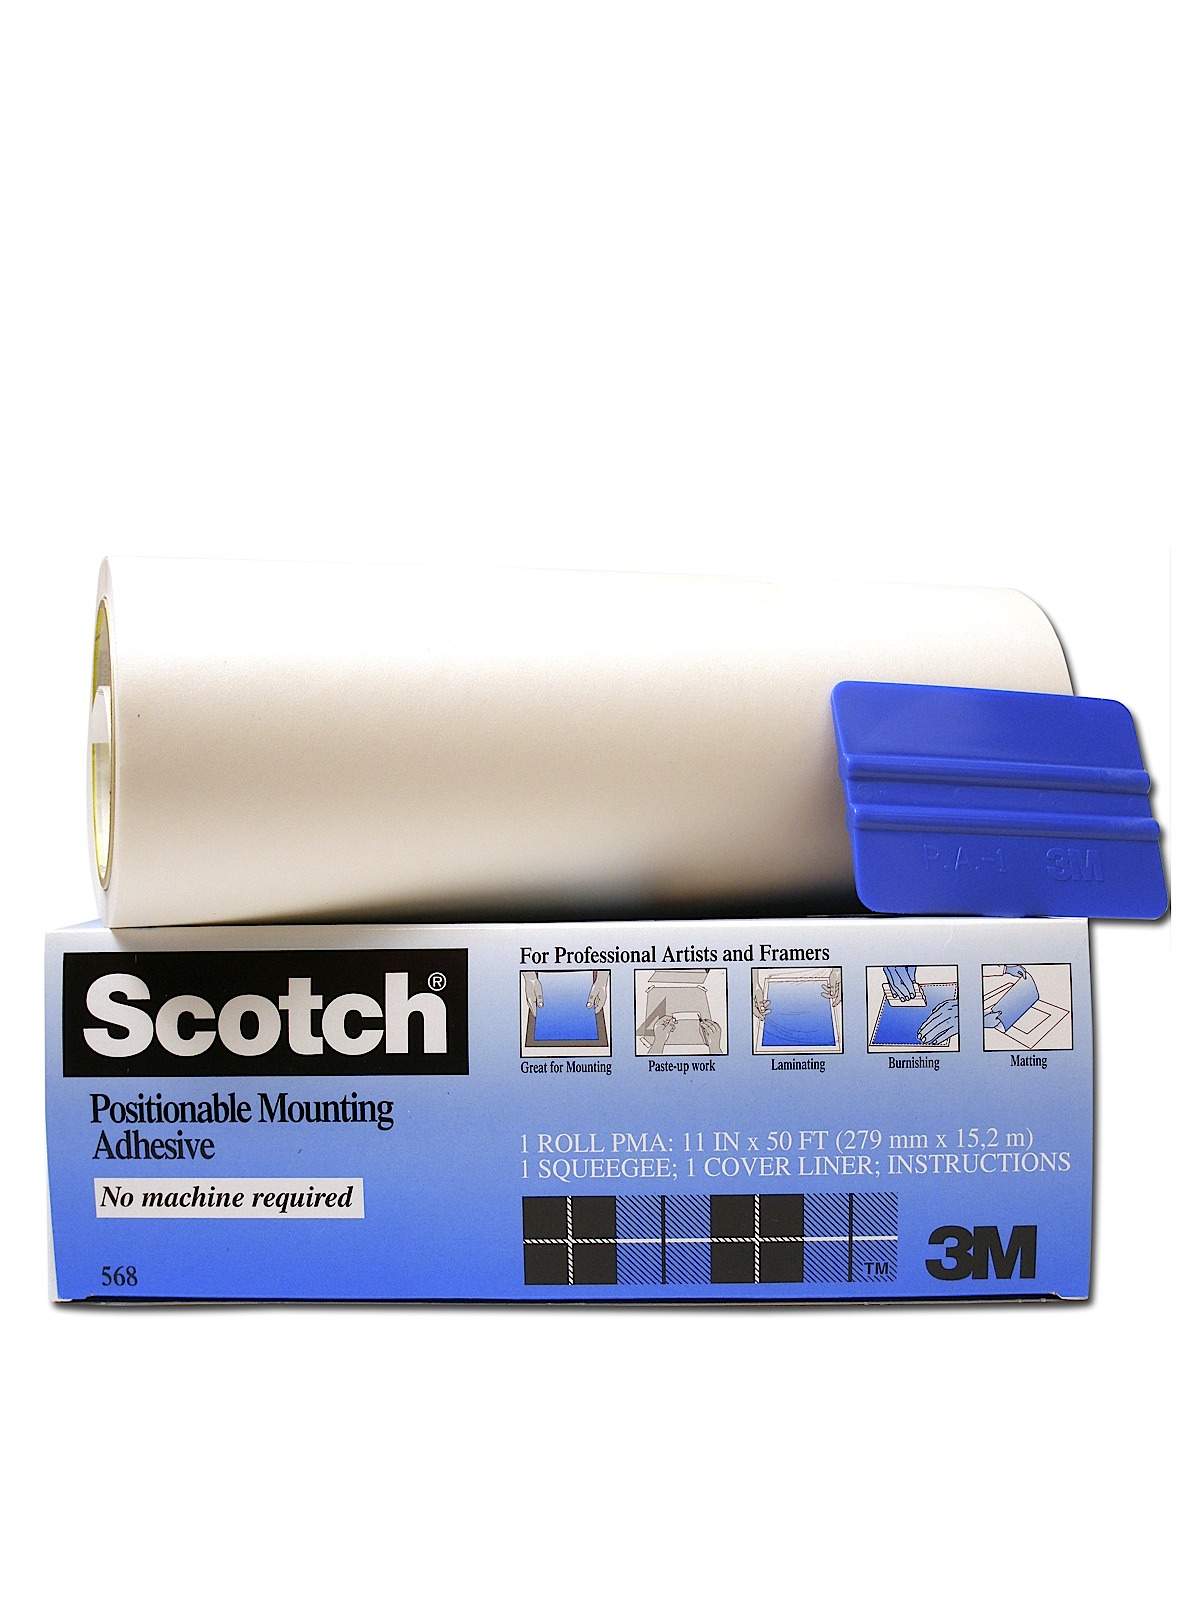 Scotch - Positionable Mounting Adhesive 568